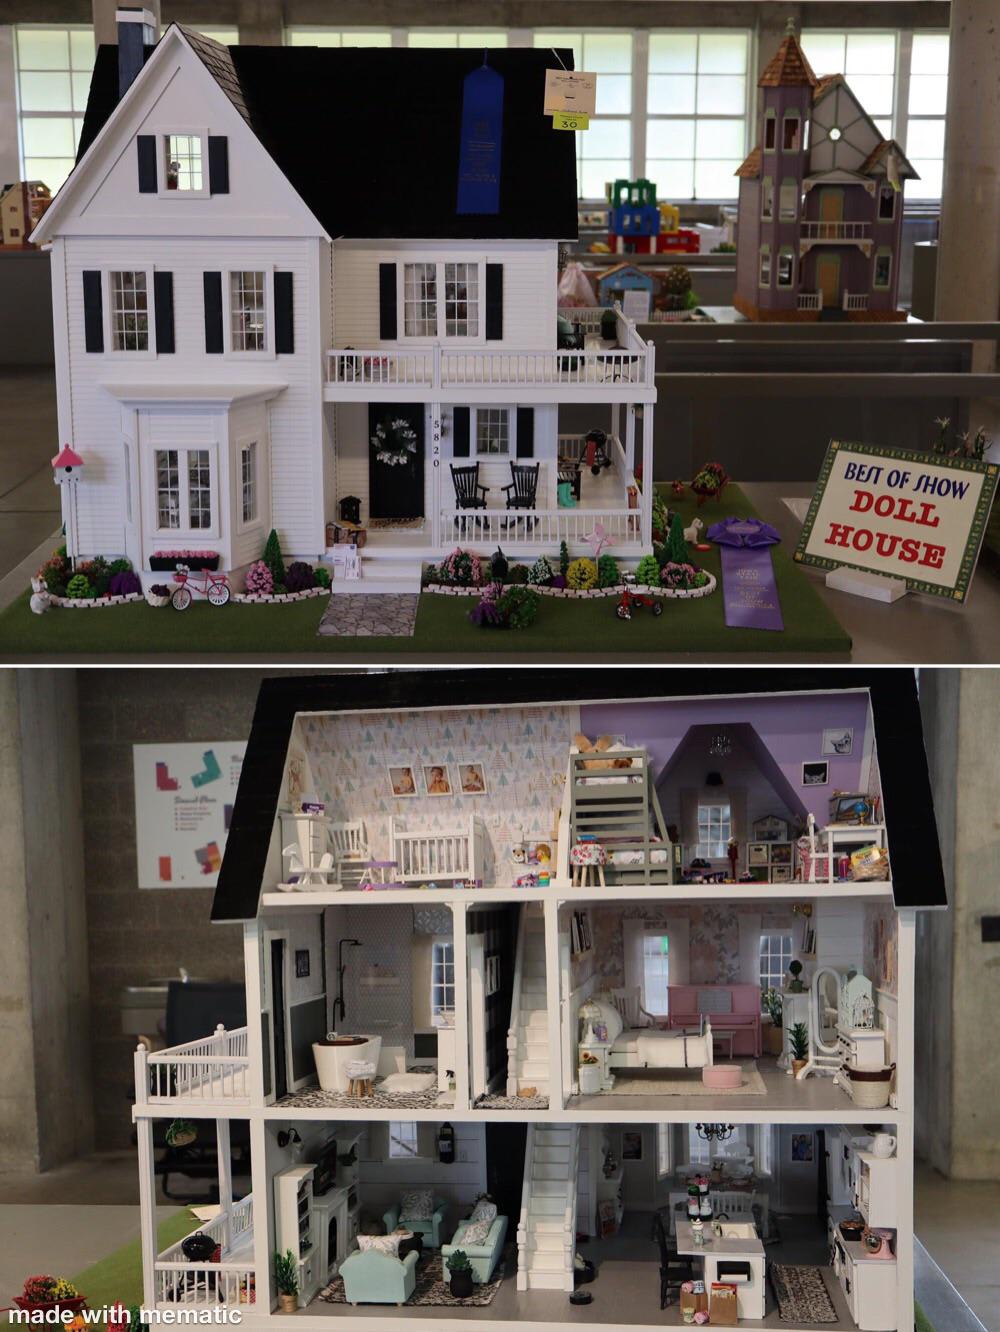 My wife spent the last year and a half working on this dollhouse, and it placed Best of Show at the state fair. I’m very proud of her